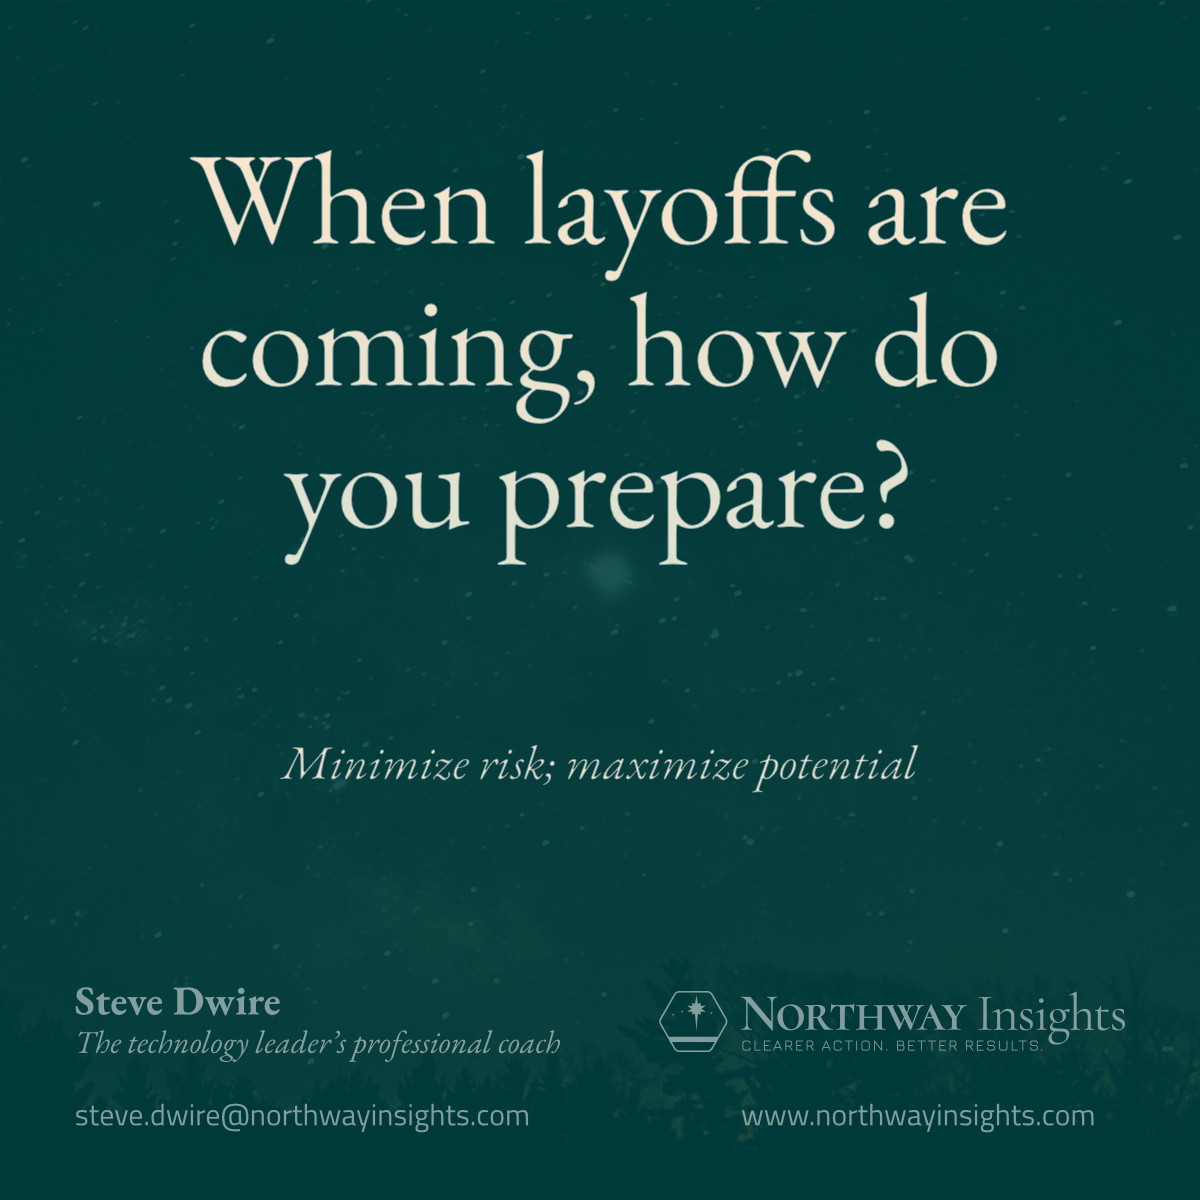 When layoffs are coming, how do you prepare? (Minimize risk; maximize potential)